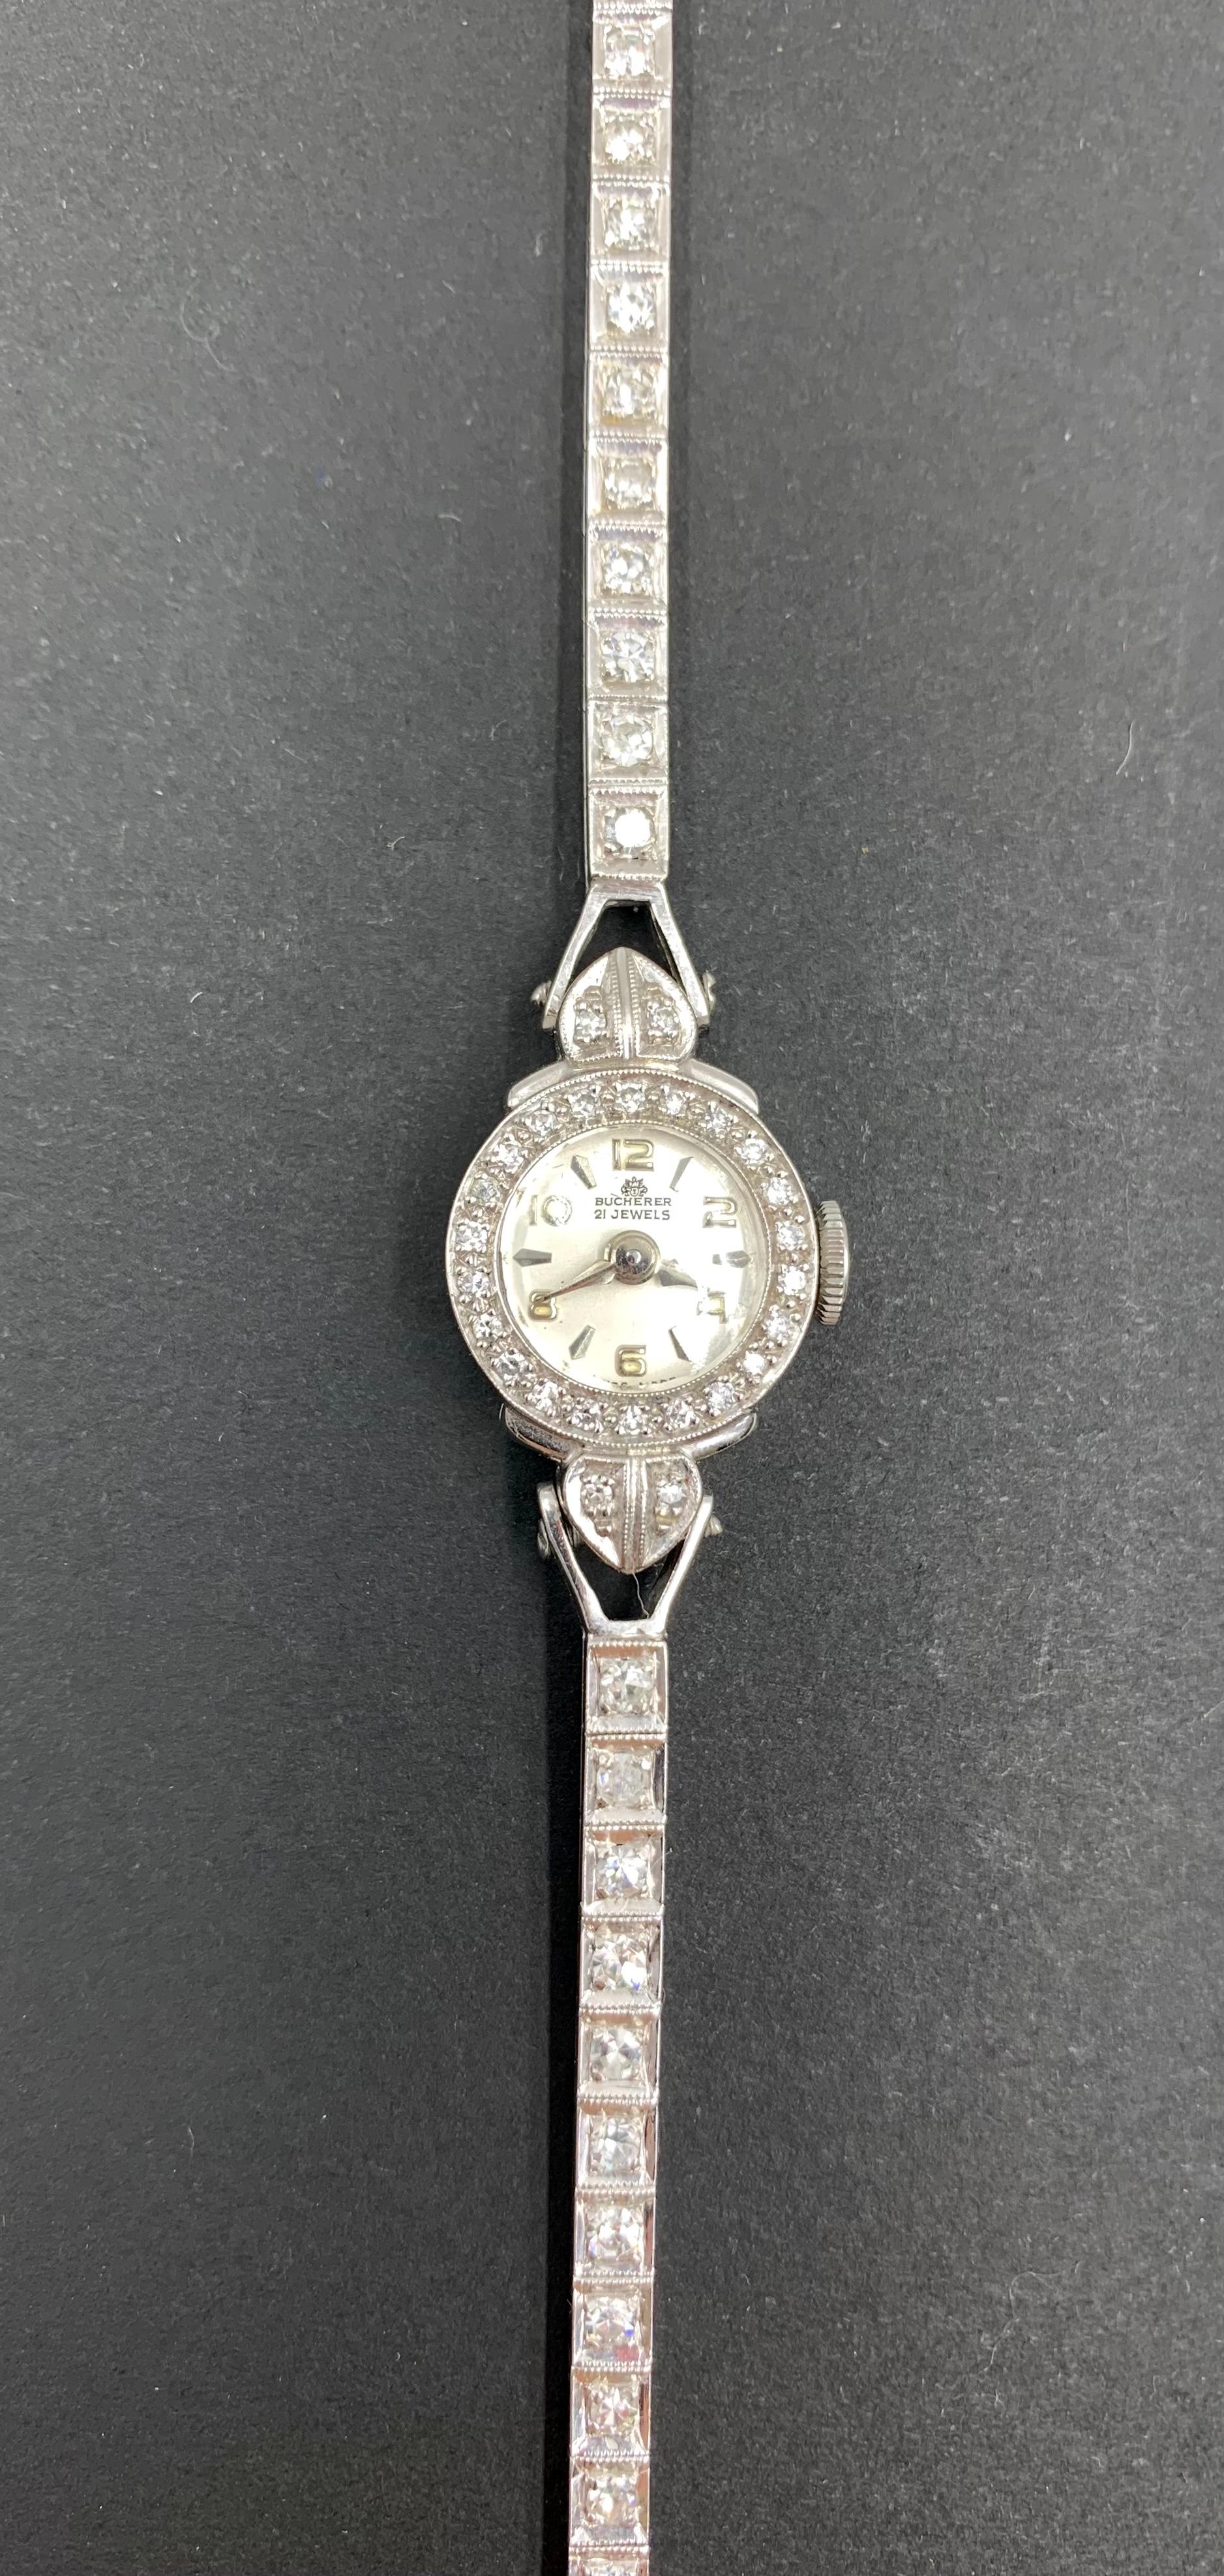 Elegant Art Deco period Bucherer diamond, platinum, 14K white gold bracelet watch of diminutive form.
Early 20th Century
Mini watches have graced some fabulous wrists over the years- Queen Elizabeth II wore one for her coronation, Princess Diana was